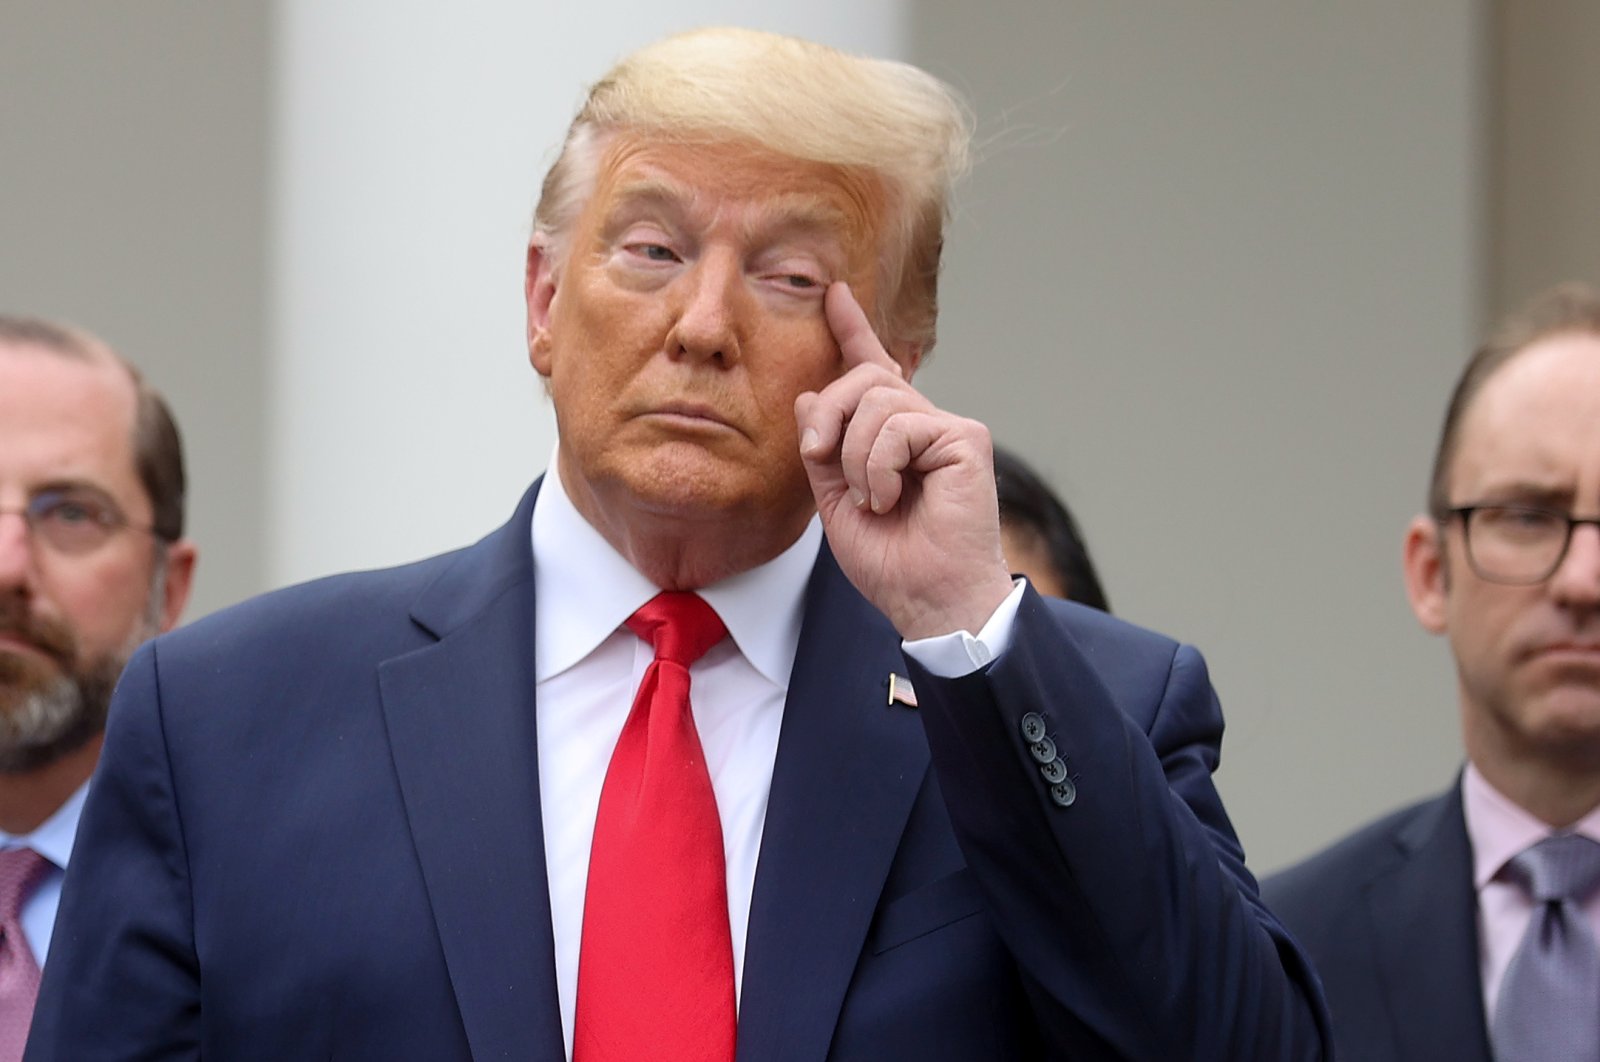 U.S. President Donald Trump pauses during a news conference where he declared the coronavirus pandemic a national emergency in the Rose Garden of the White House in Washington, U.S., Friday, March 13, 2020. (Reuters Photo)